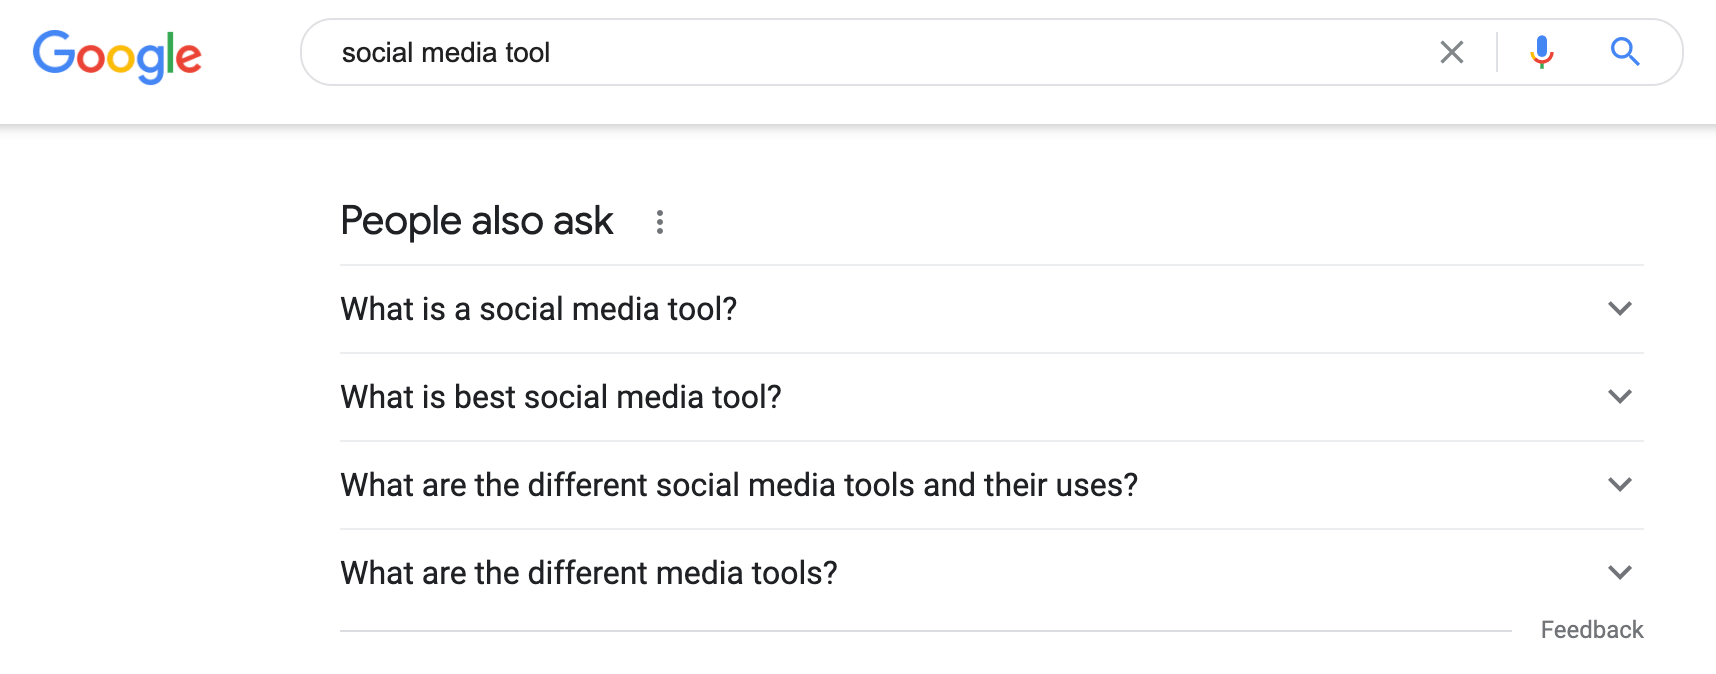 The People section also asks on Google when searching for social media tools to create audience profiles.